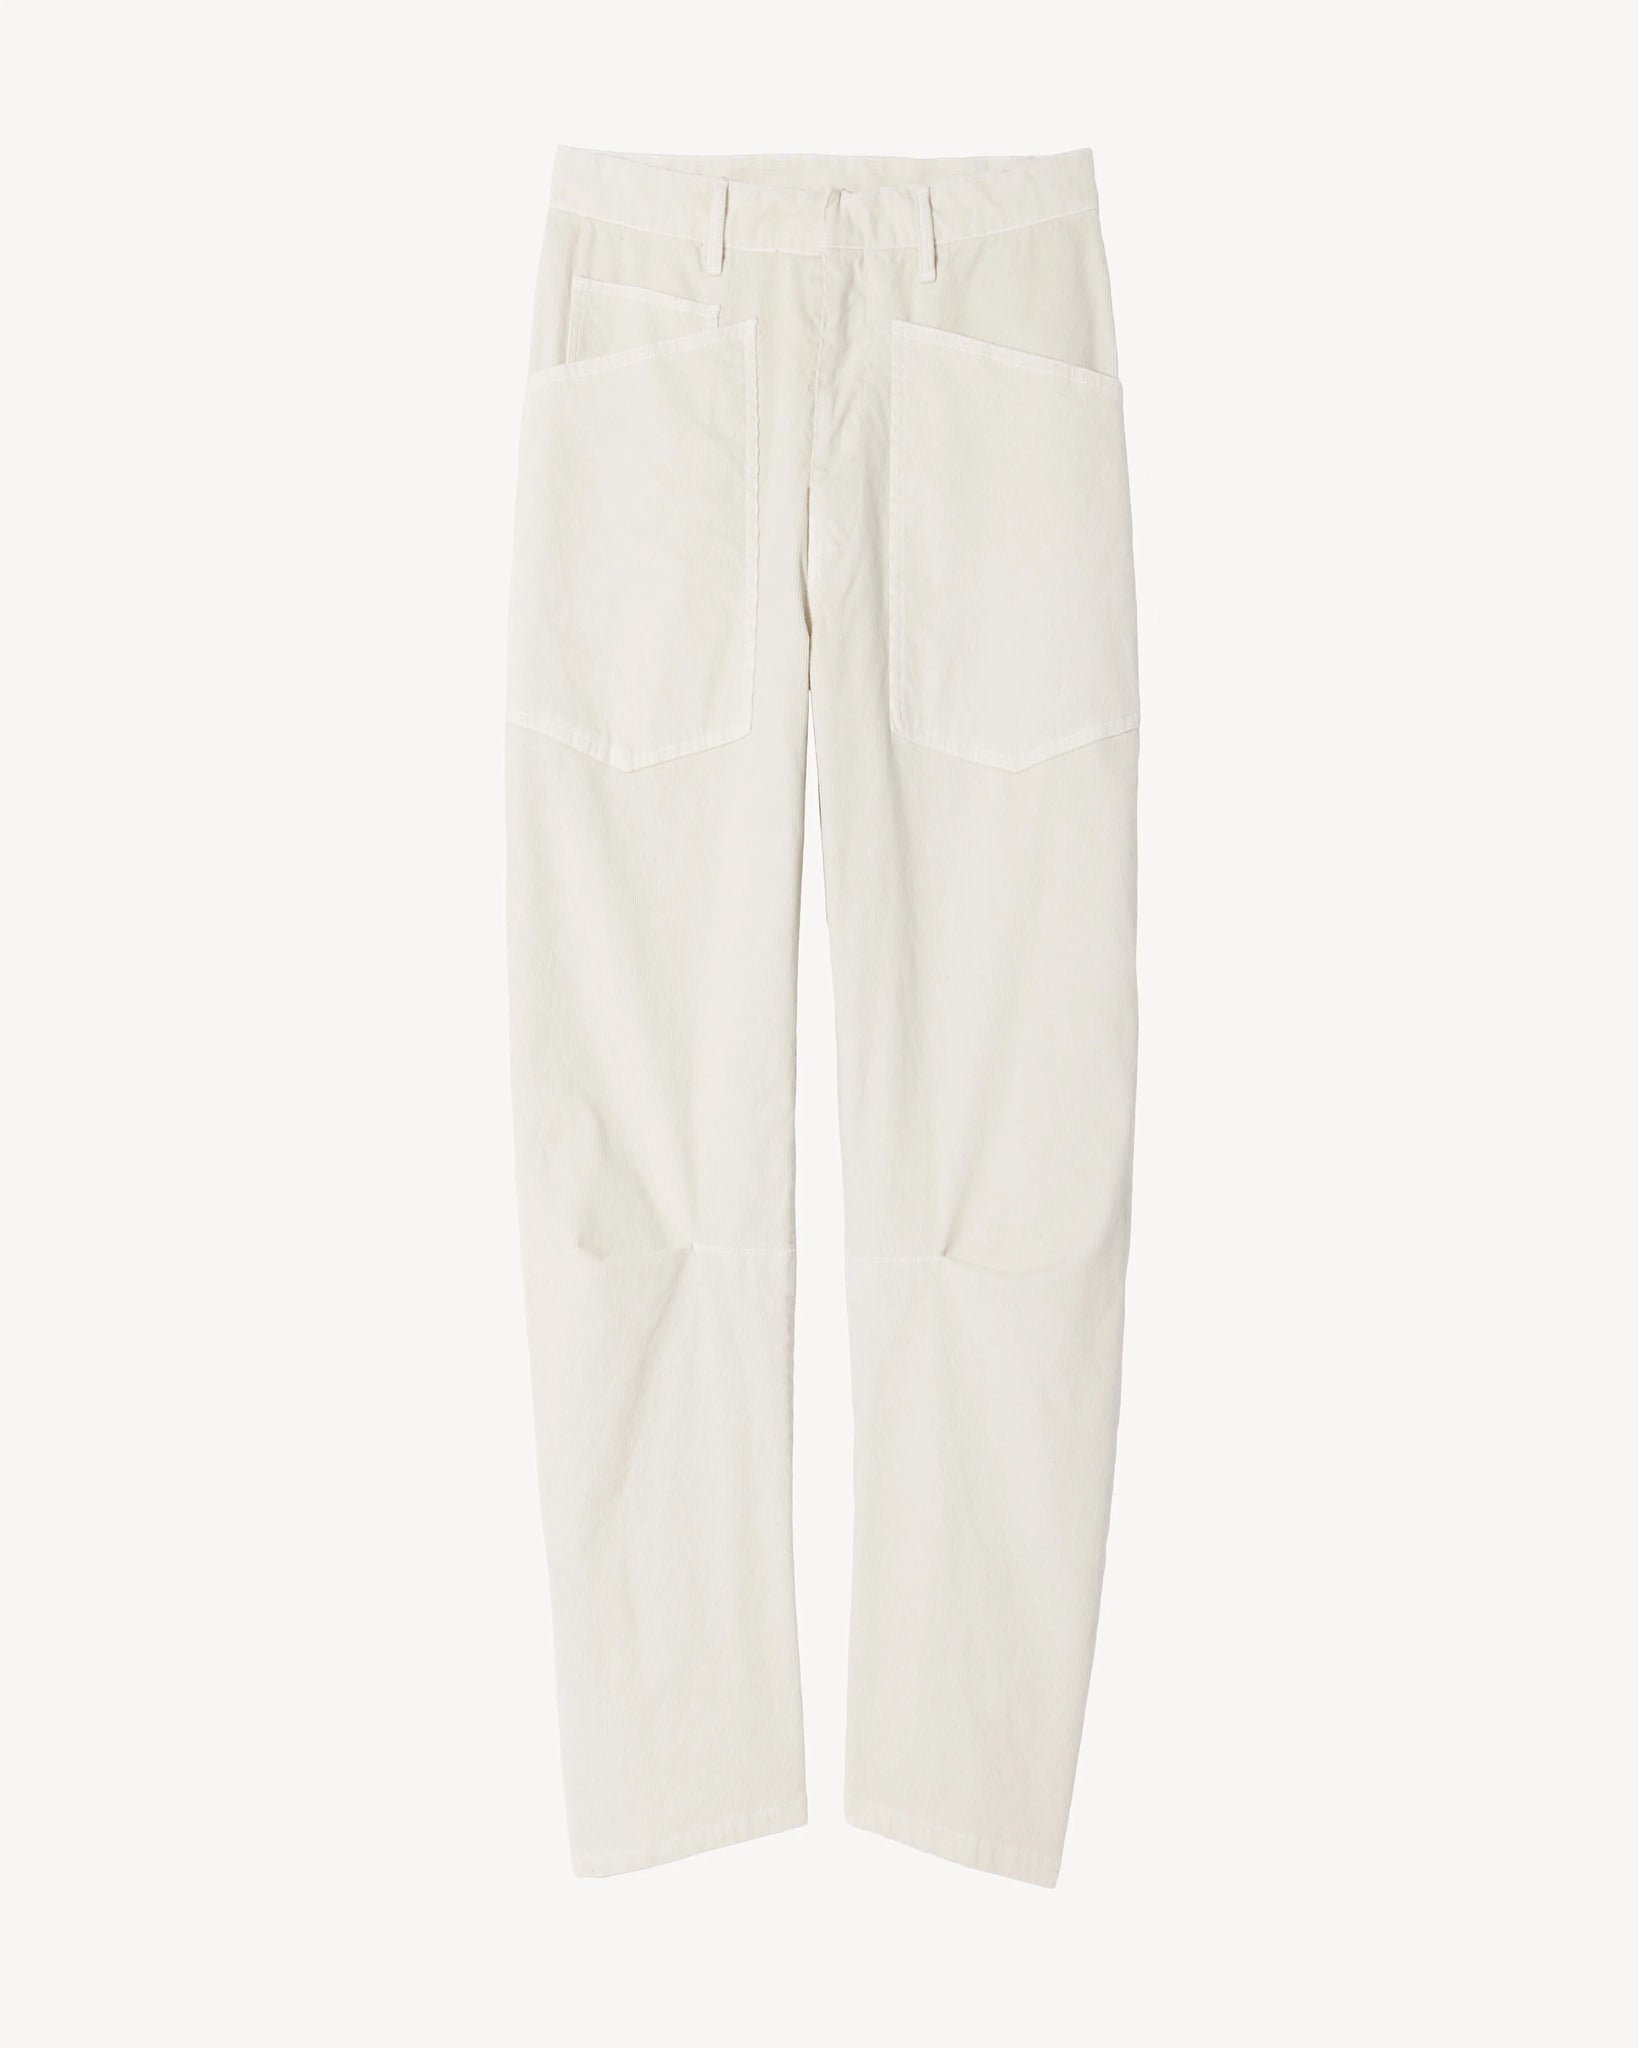 Shon Pant in Stone